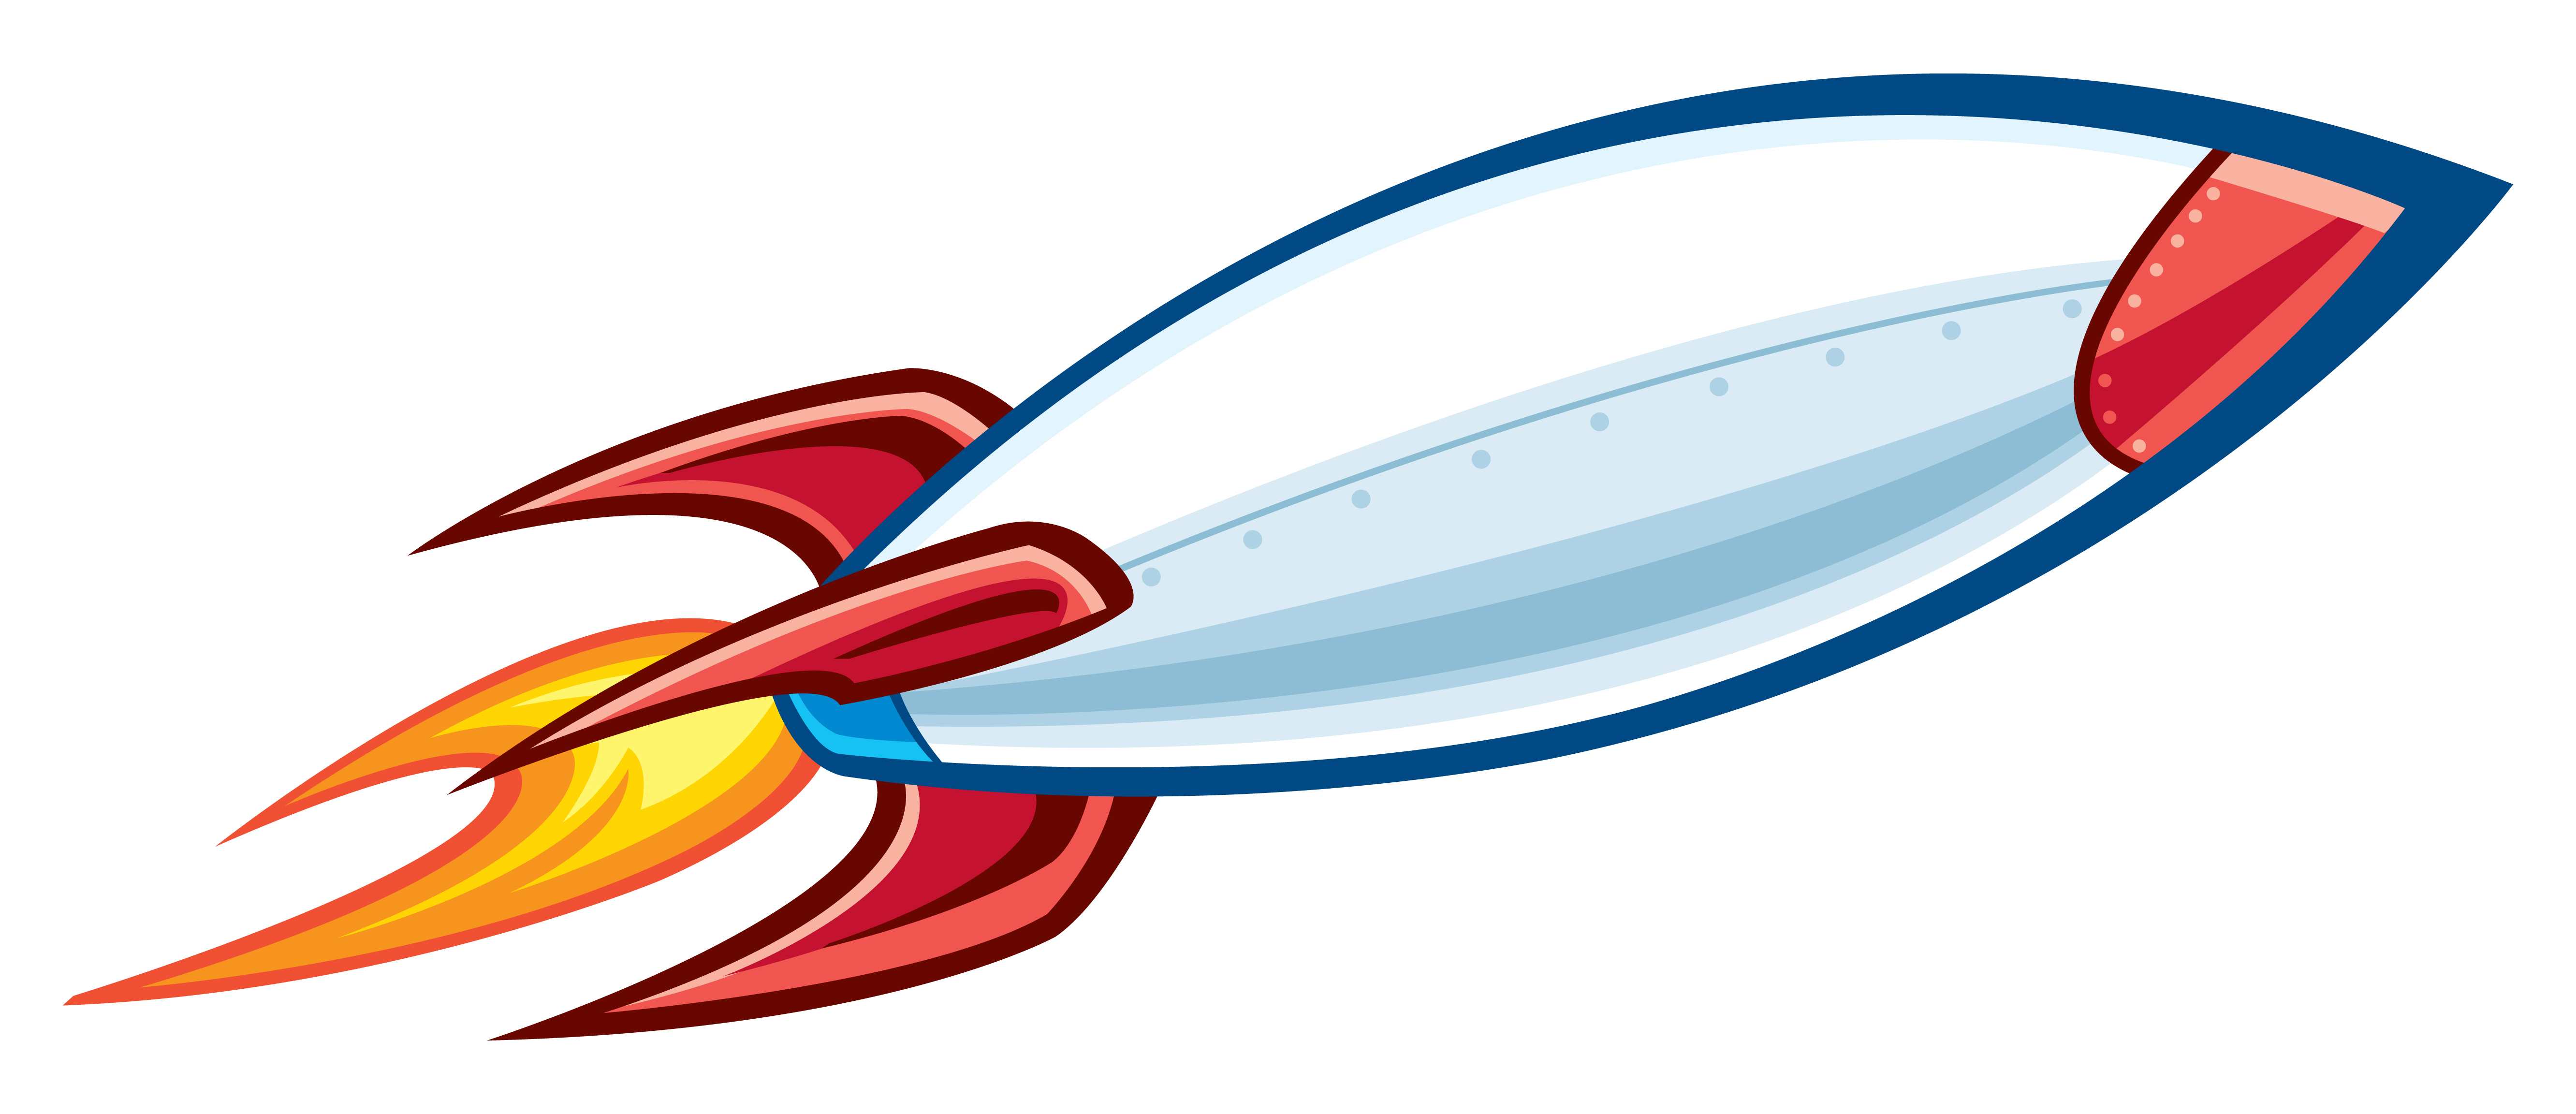 Cartoon Rocket Images  Pictures - Becuo